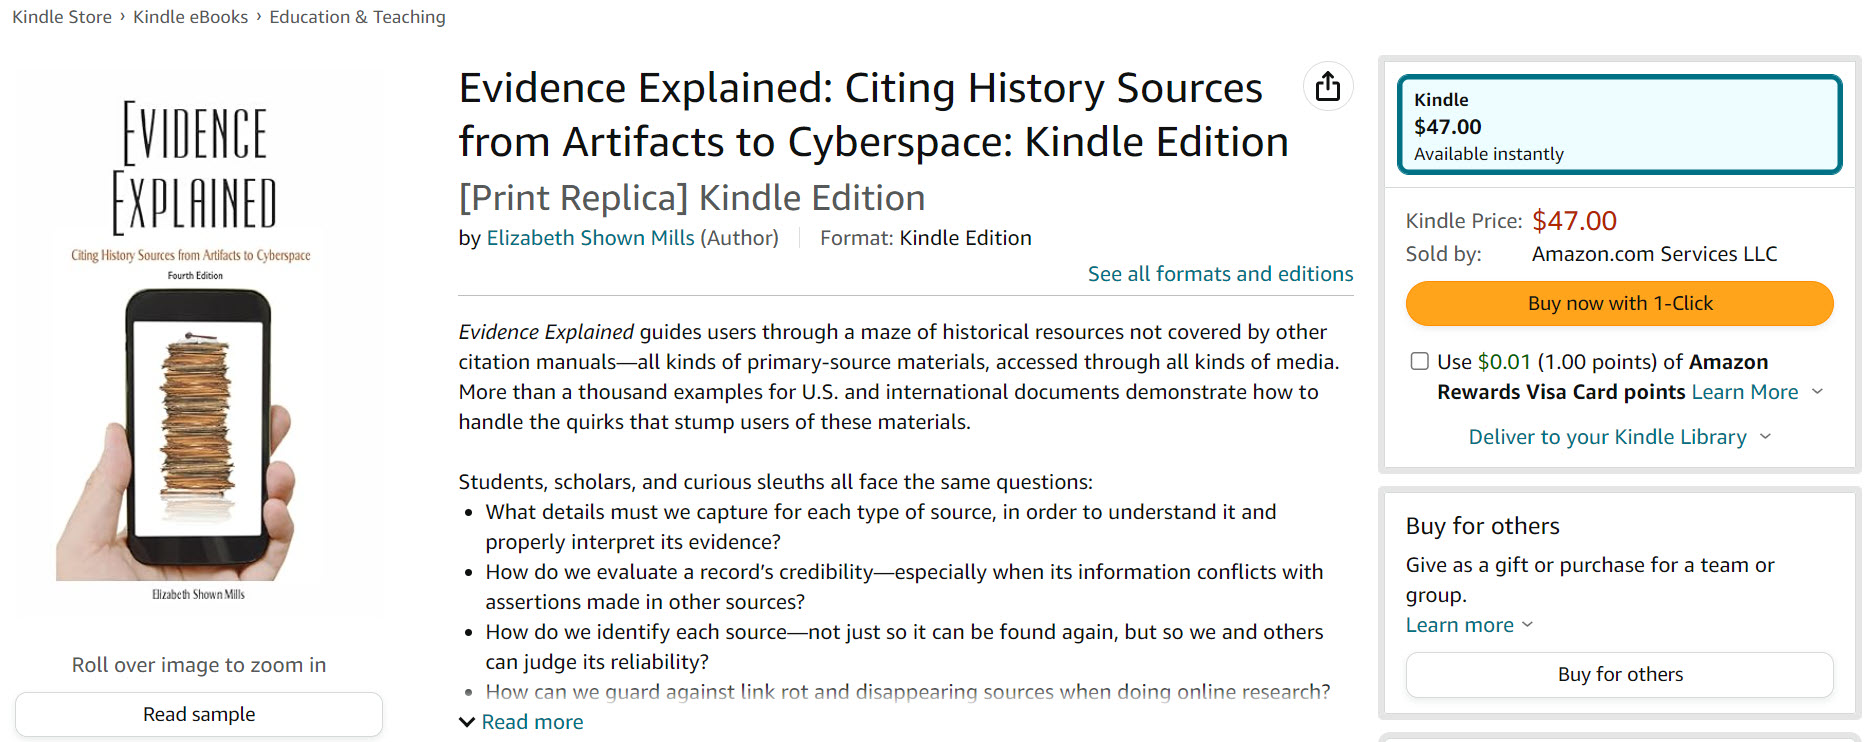 Evidence Explained 4th Edition Amazon Kindle Version NOW AVAILABLE!